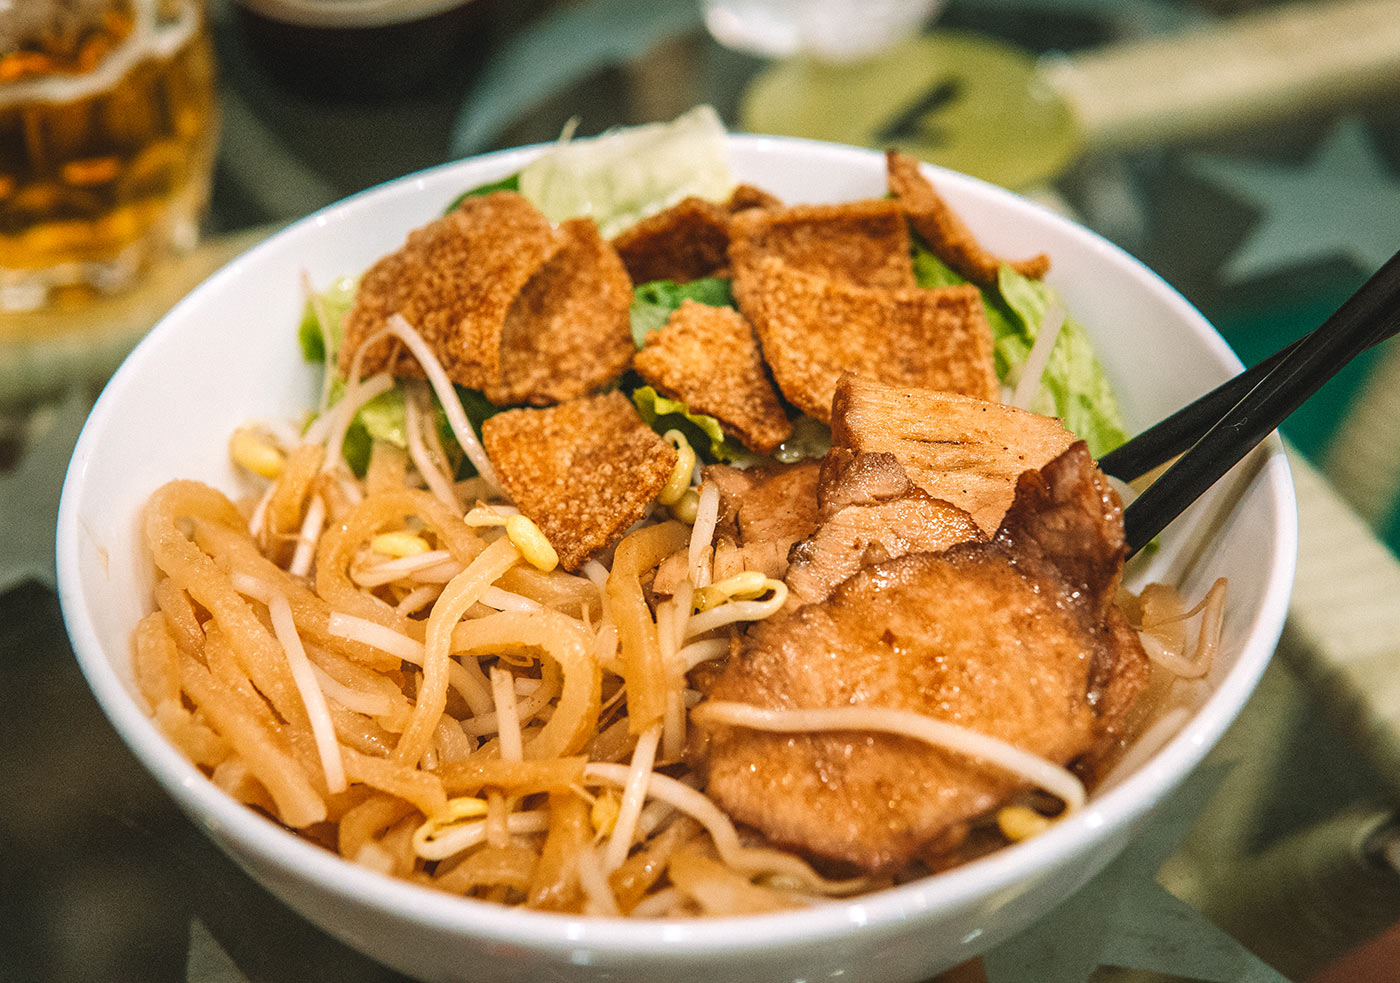 Hoi An food guide |The best street food to try in Hoi An, Vietnam blog post | cao lau